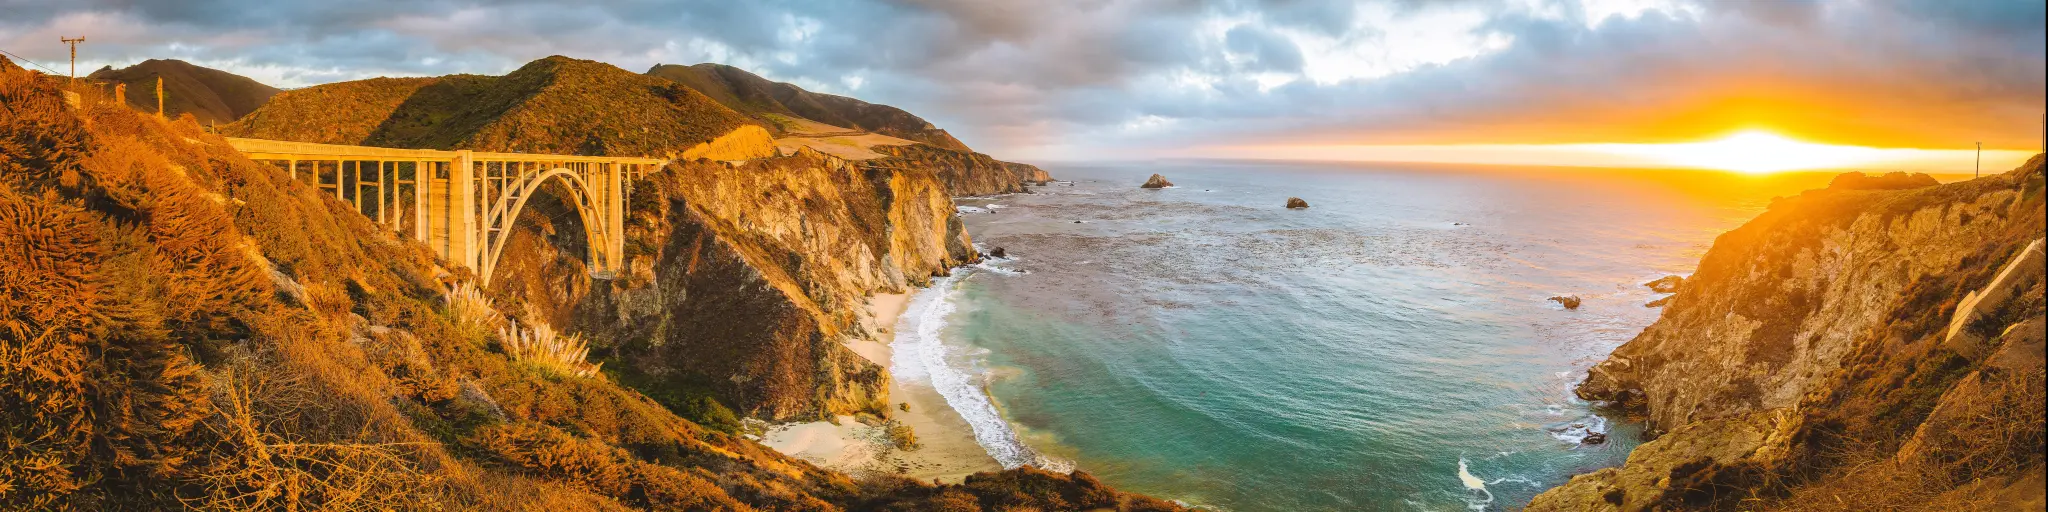 Panoramic view of the Bixby Creek Bridge on the Pacific Coast Highway in California at sunset with beautiful golden light